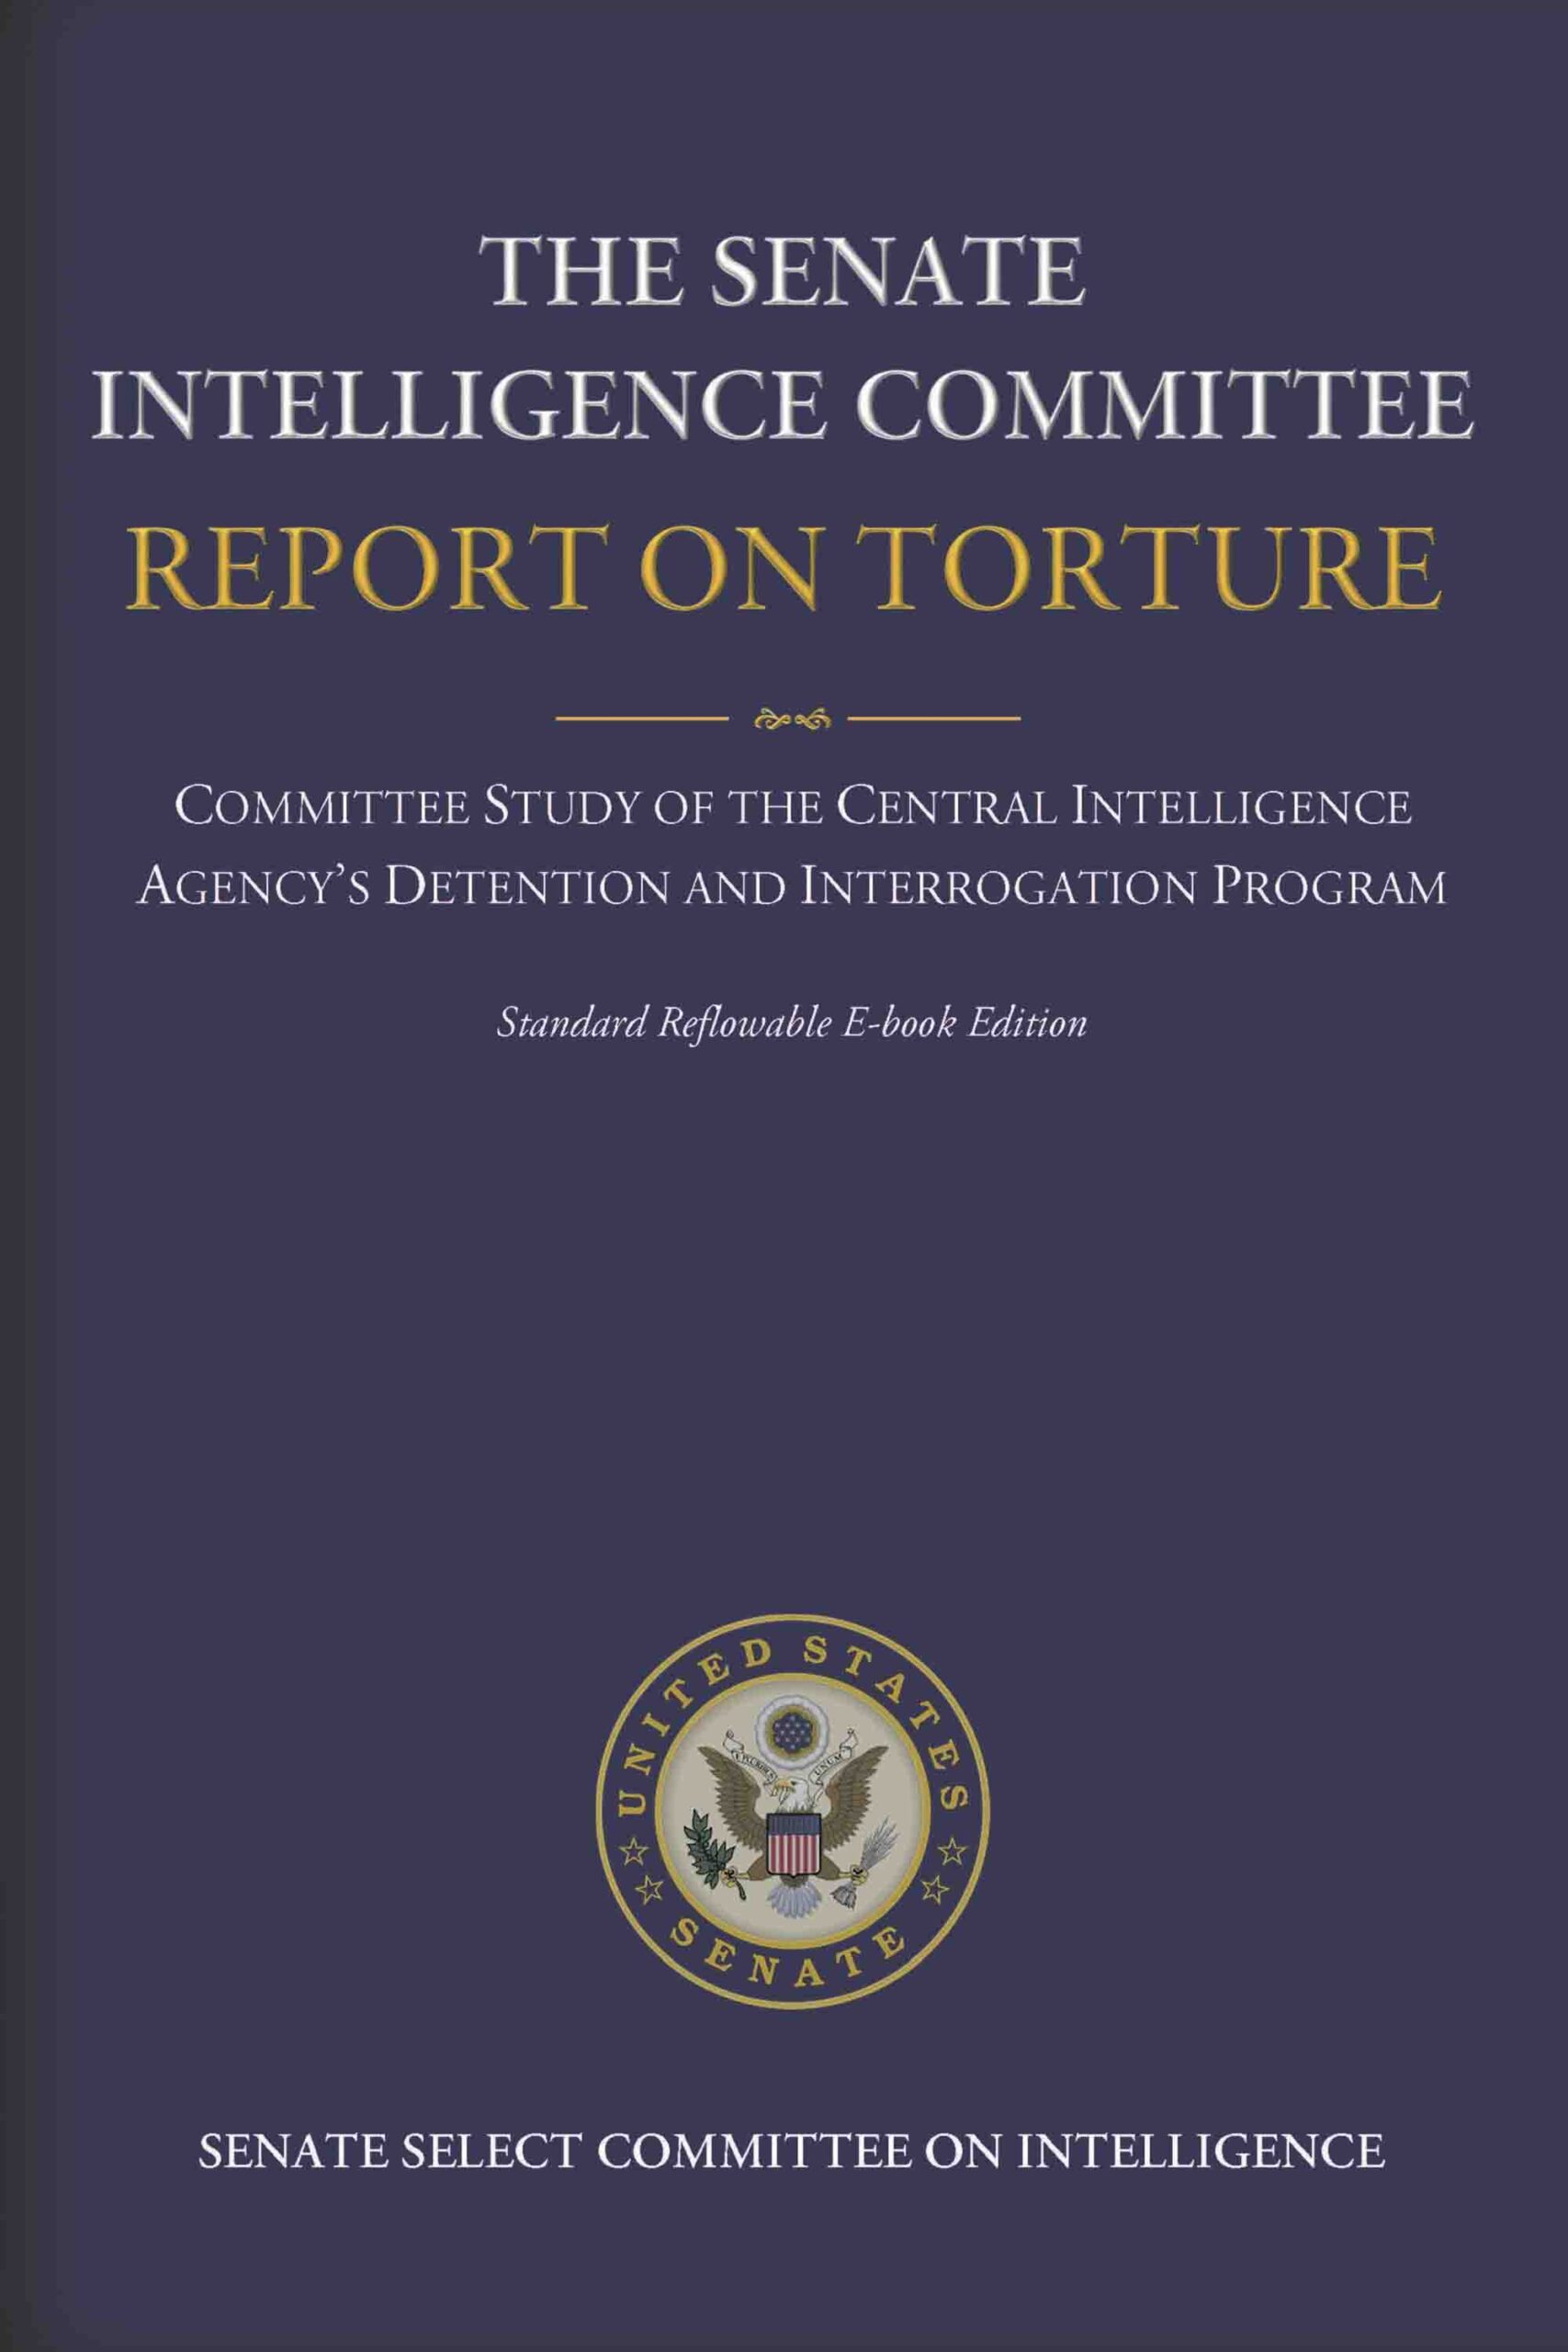 The Senate Intelligence Committee Report on Torture – Complete Standard Reflowable Flexible Ebook Edition